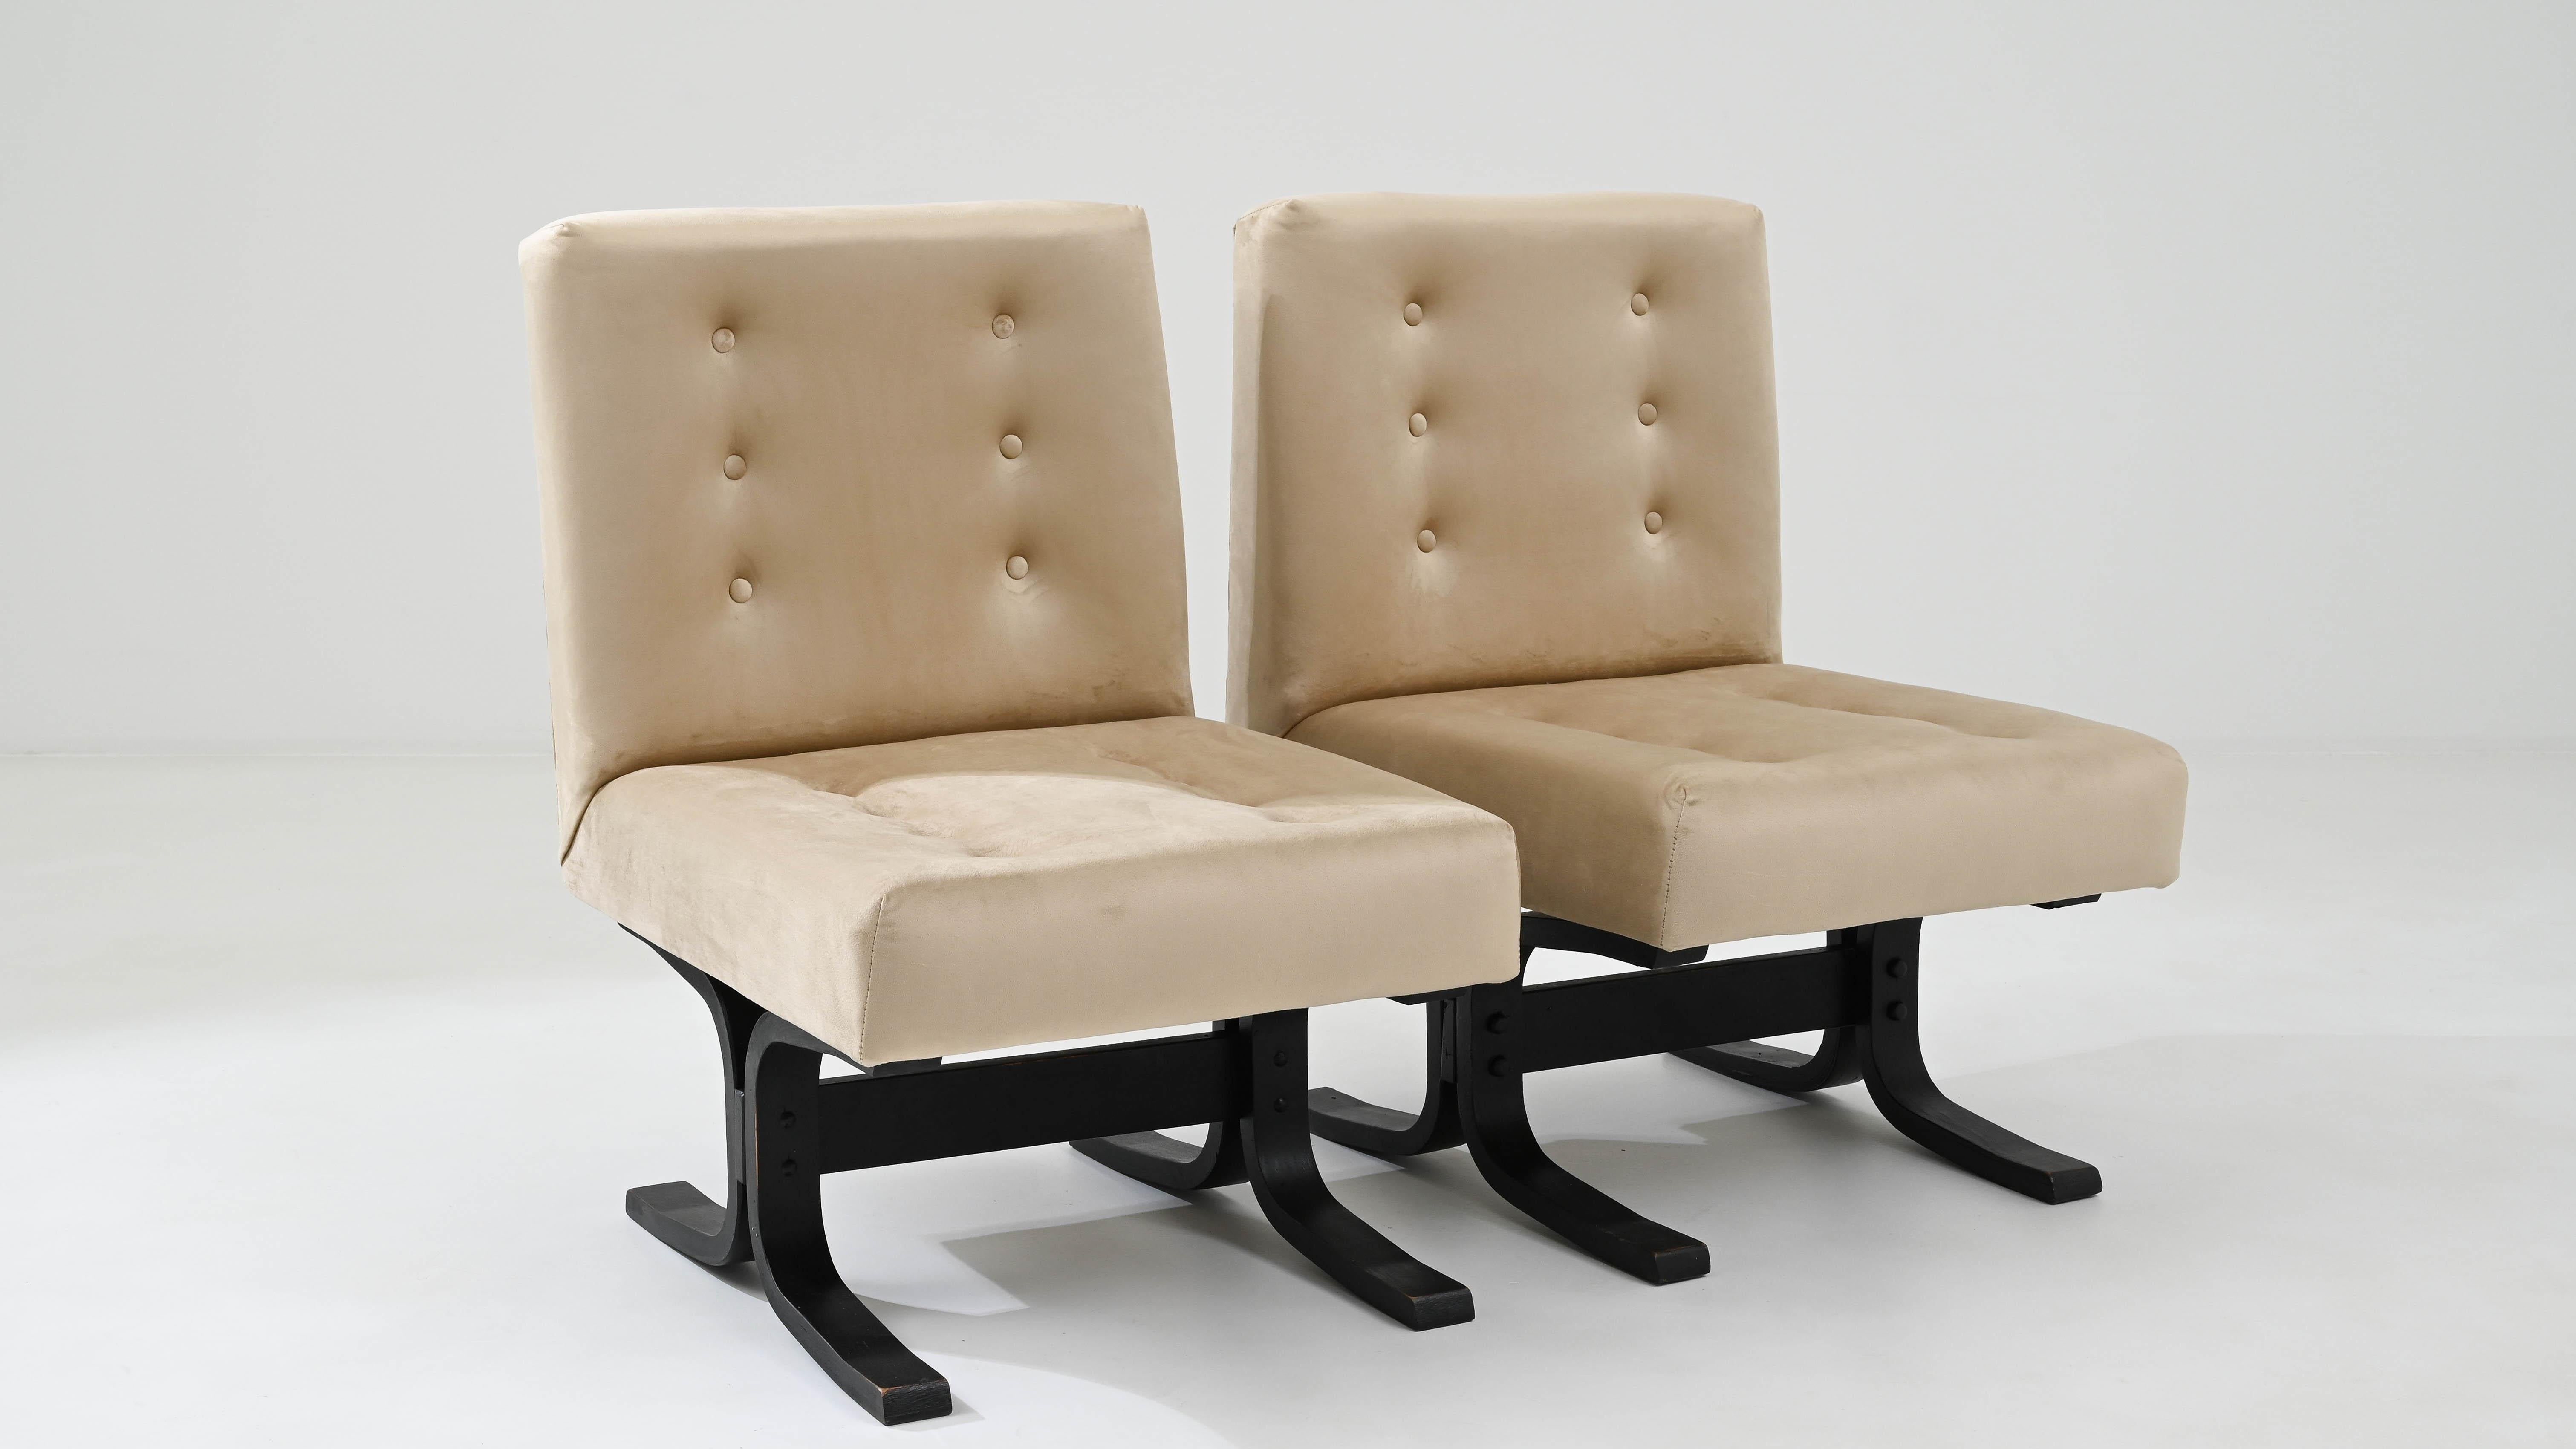 1960s Czech Upholstered Chairs by Ludvik Volak, a Pair For Sale 4